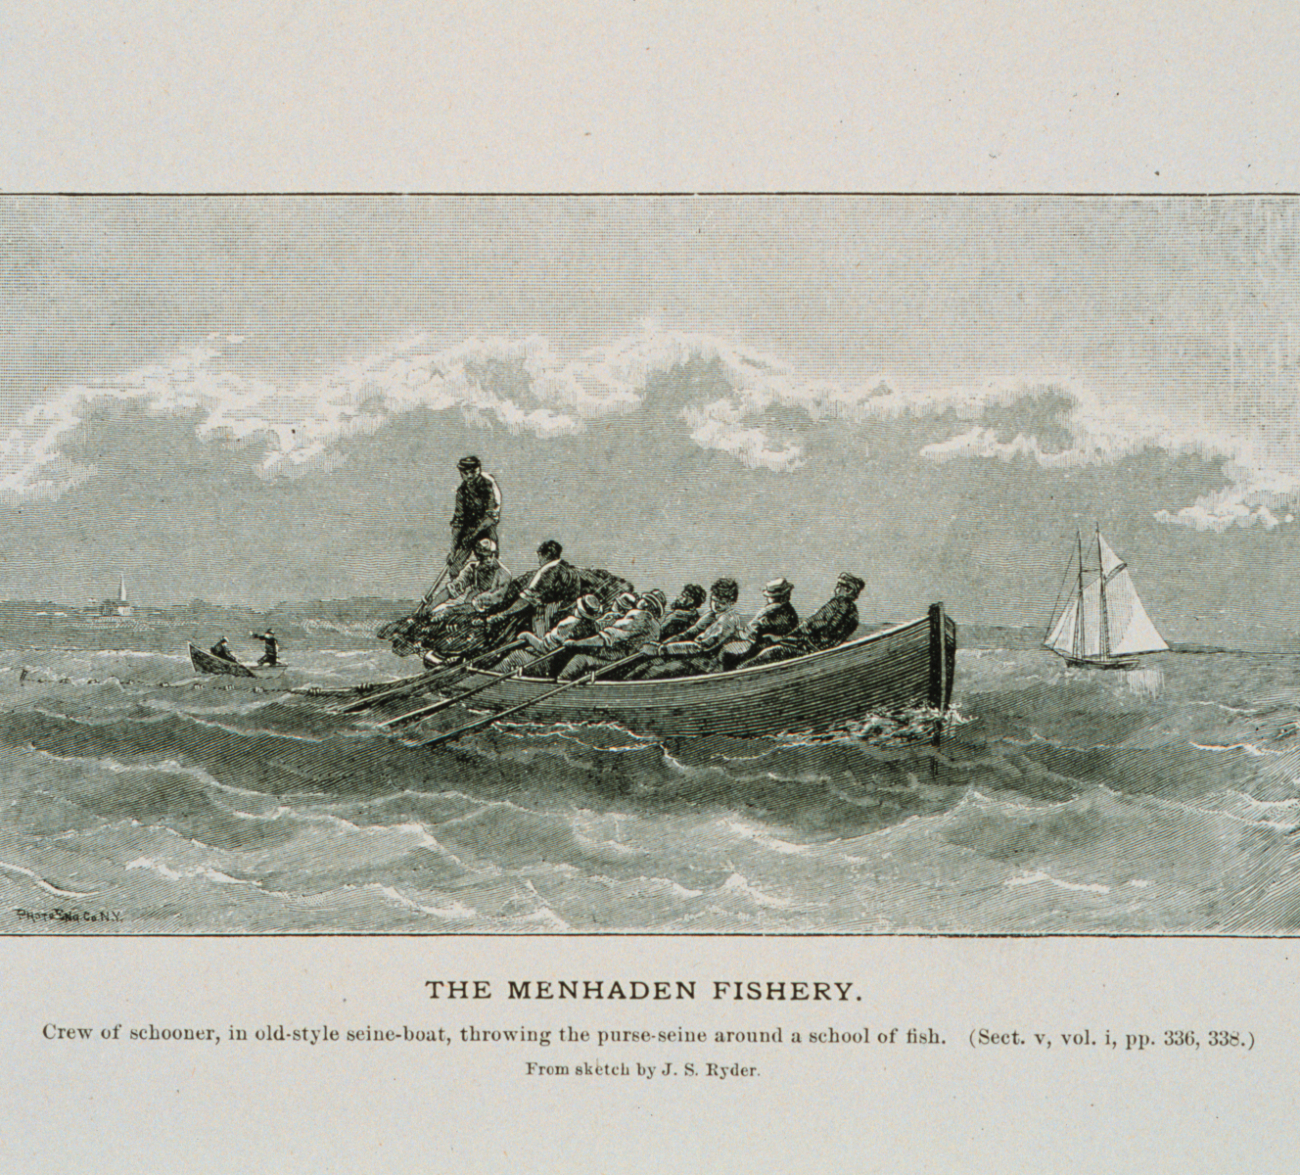 Crew of schooner, in old-style seine-boat, throwing the purse-seineFrom sketch by  J